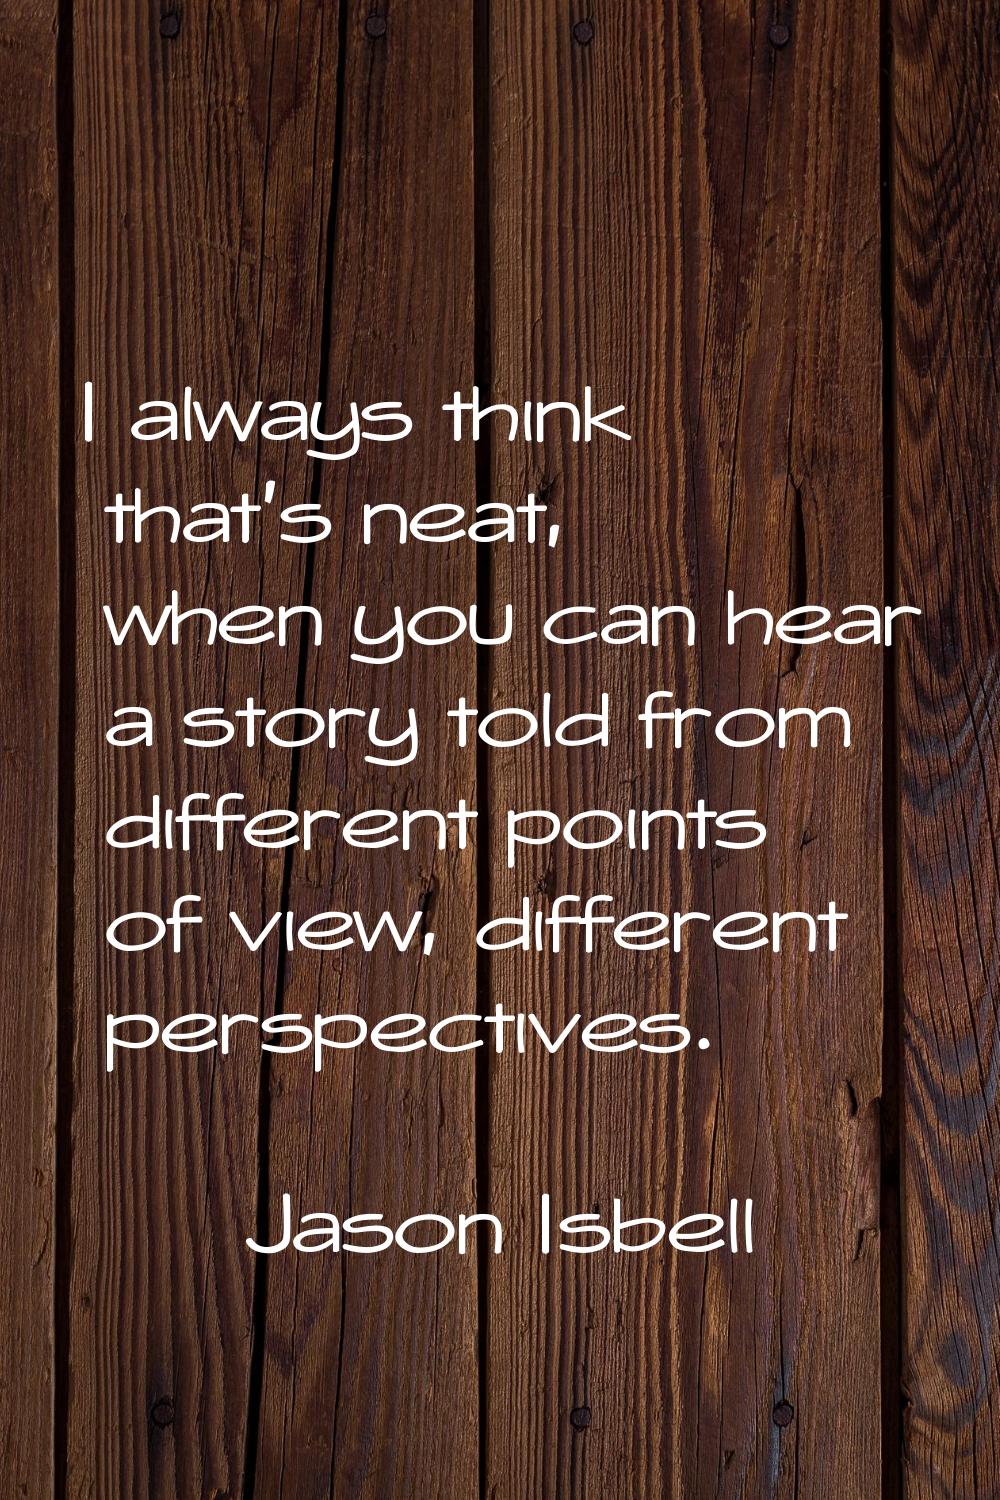 I always think that's neat, when you can hear a story told from different points of view, different